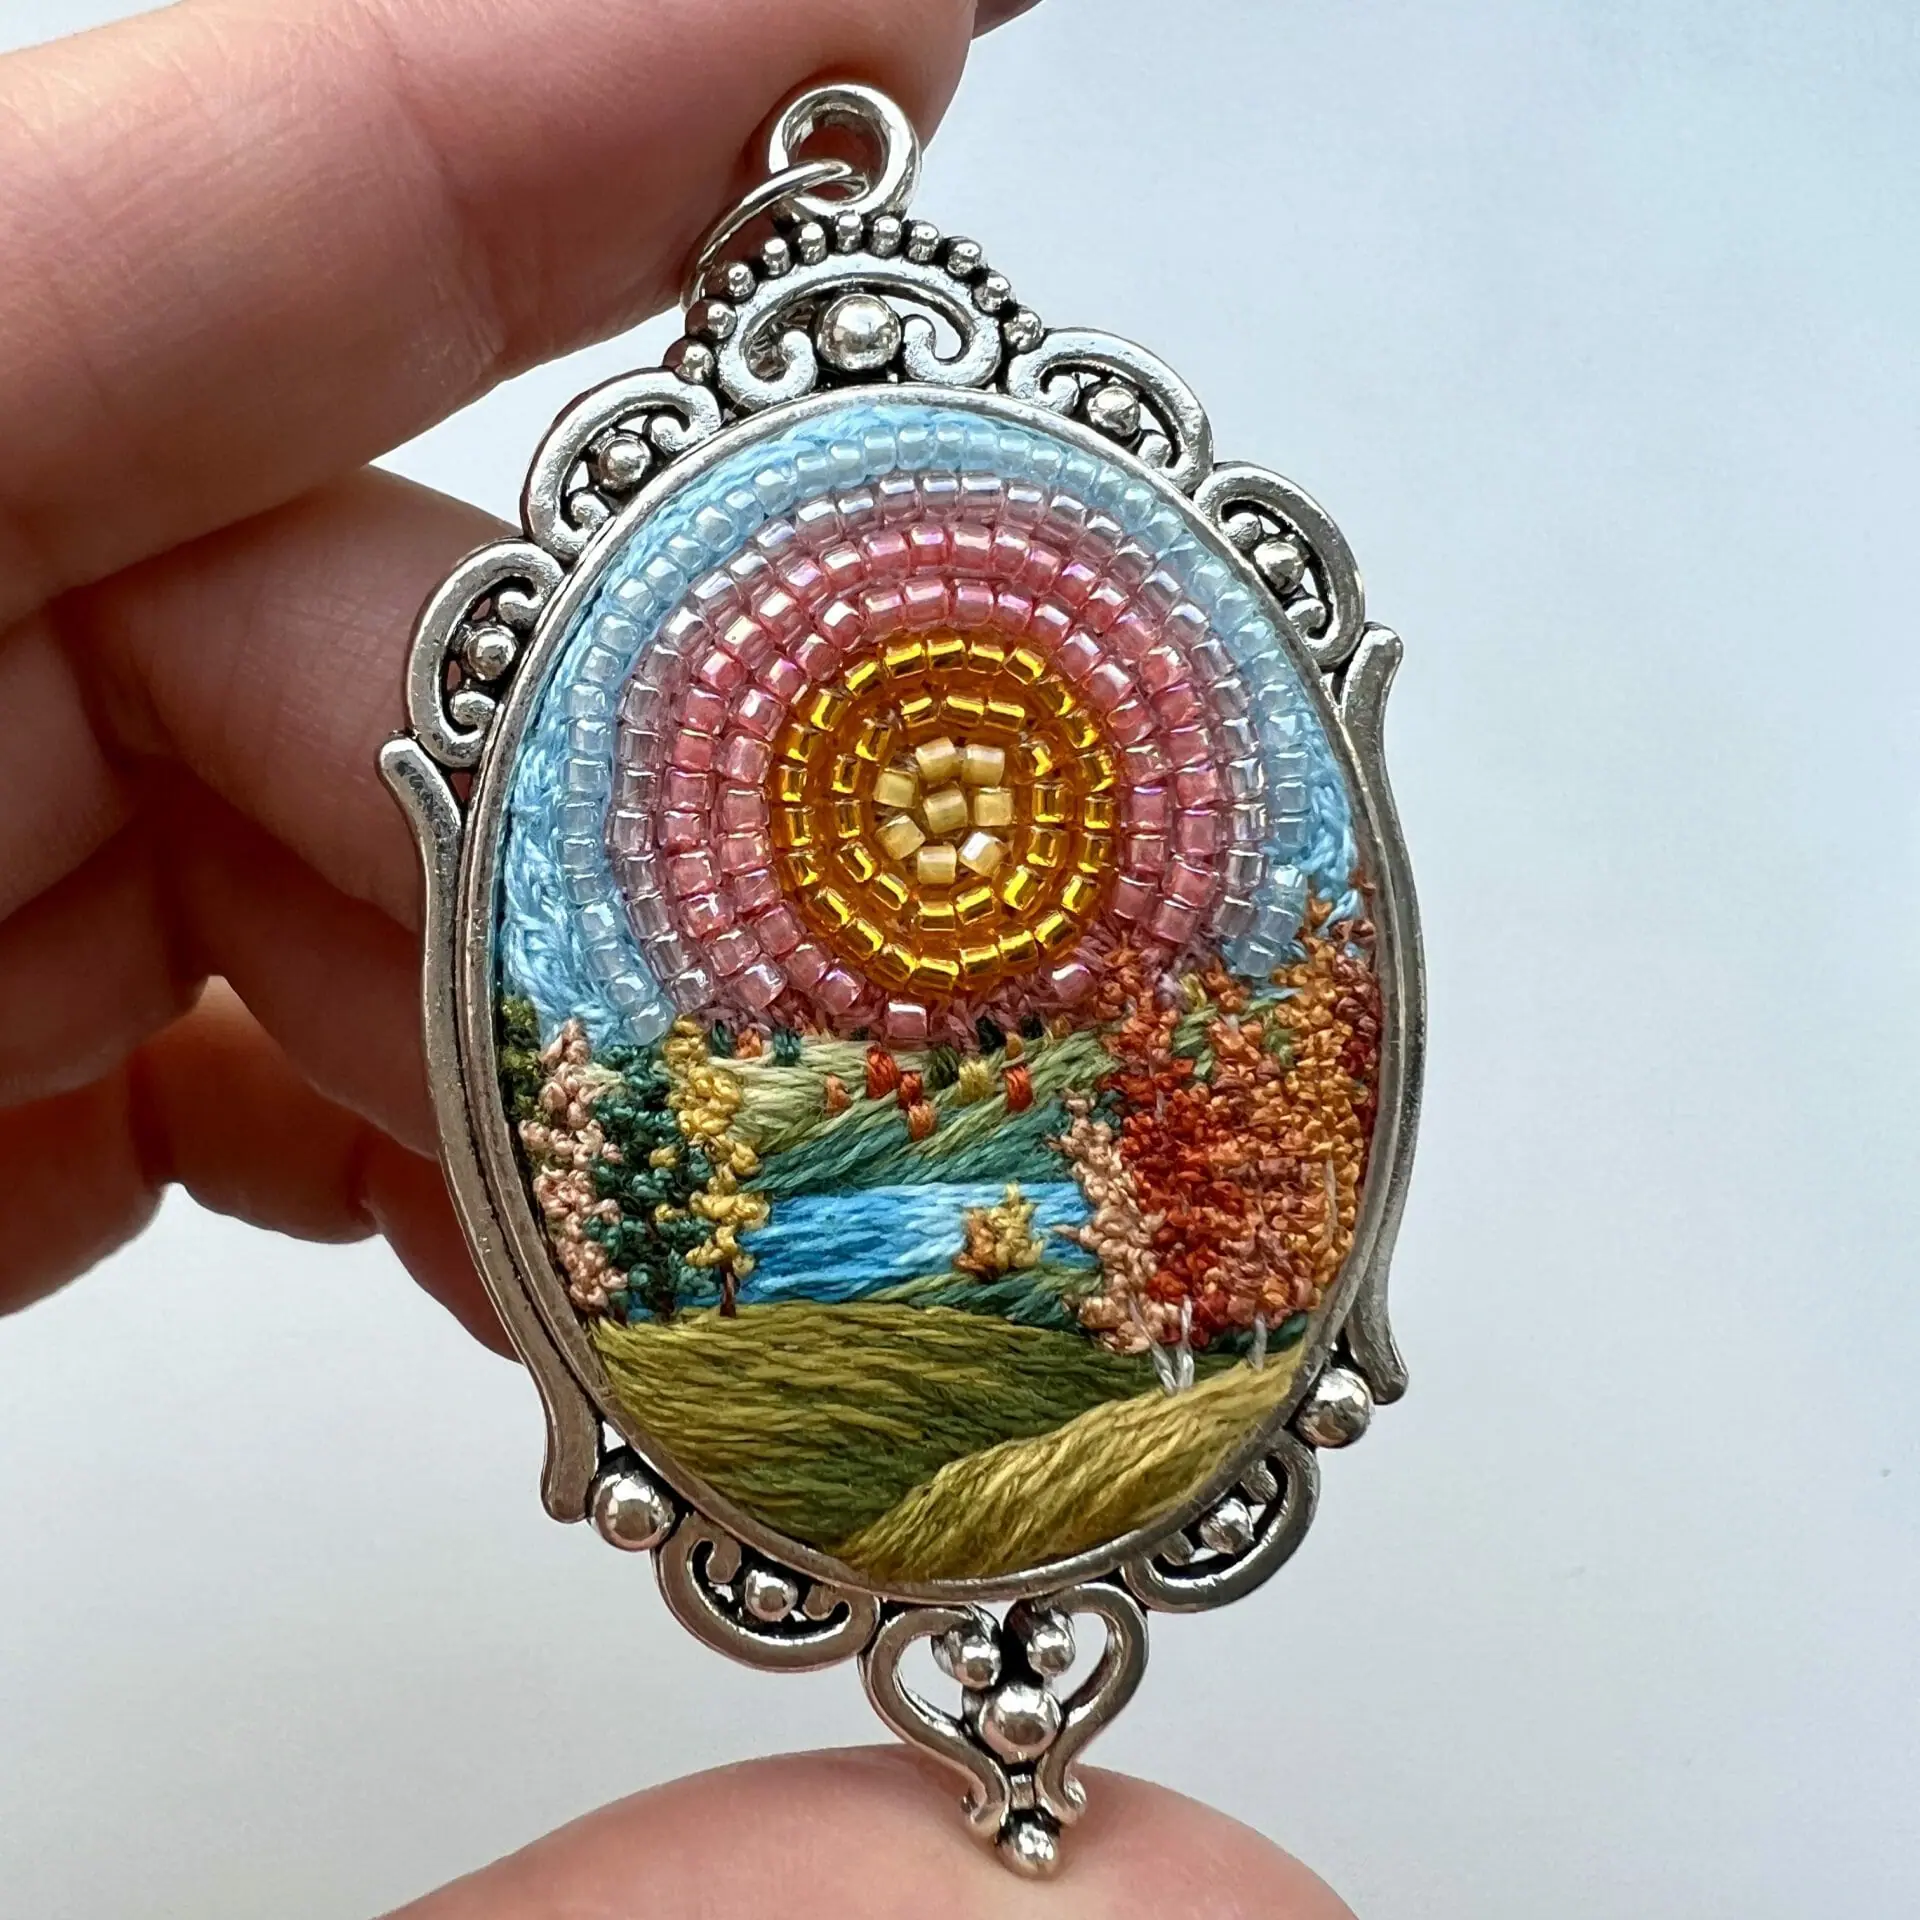 The Storm Has Passed, landscape embroidery pendant